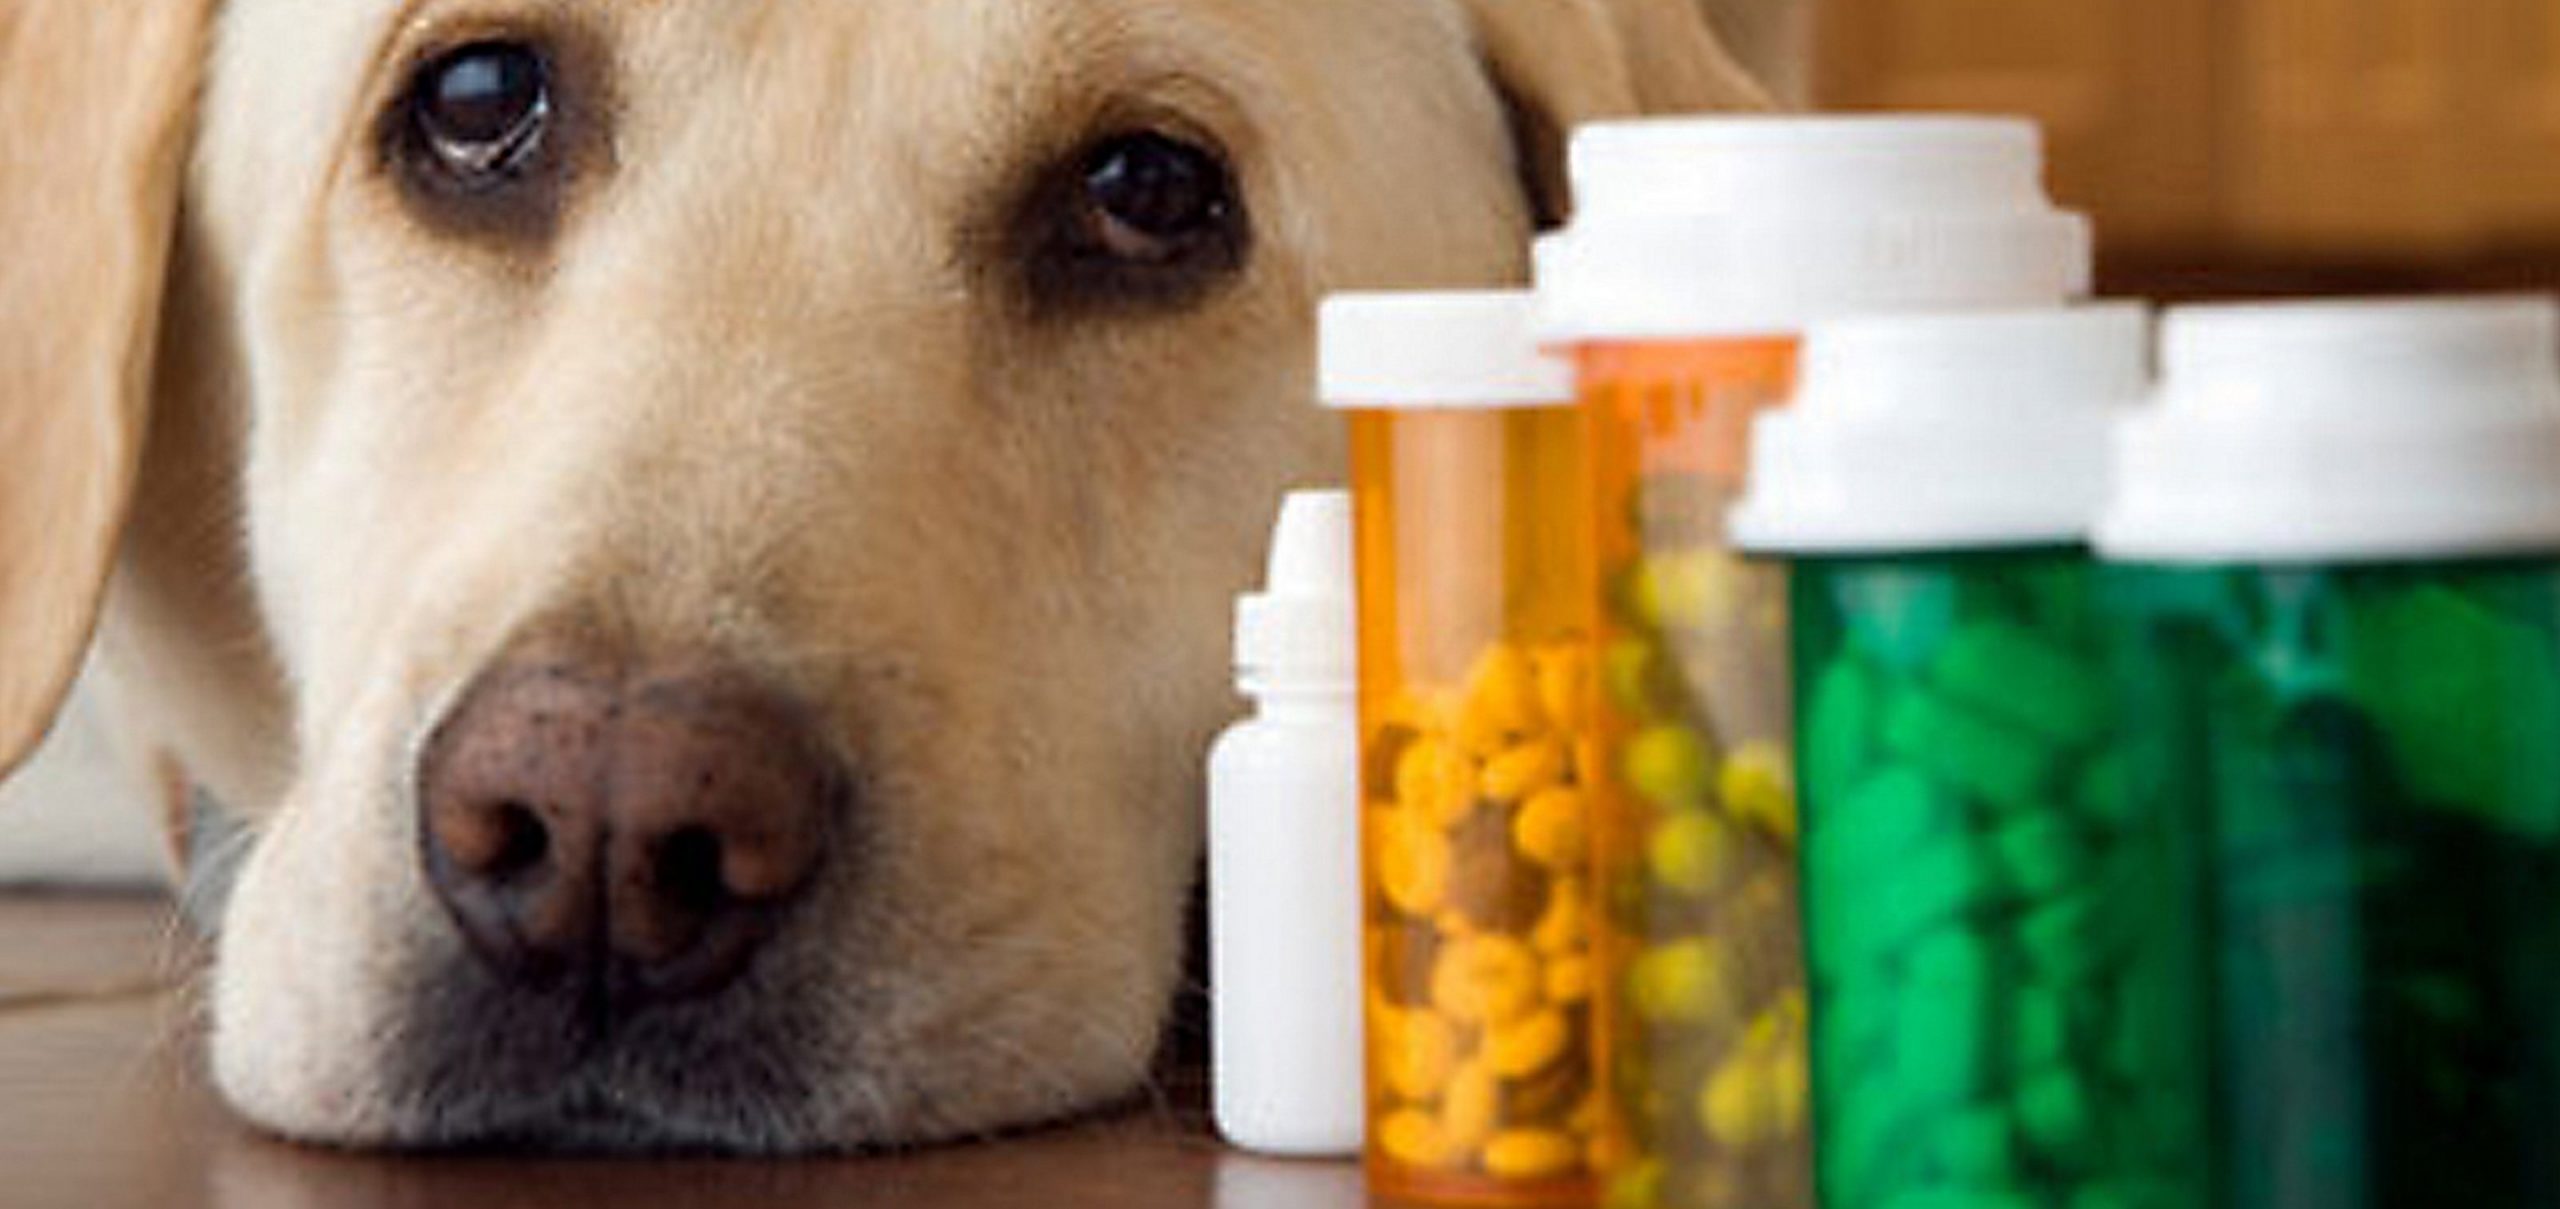 Are Supplements for Pets Necessary? 9 Dog Supplements for Optimal Canine Health at Any Age, According to Veterinarians